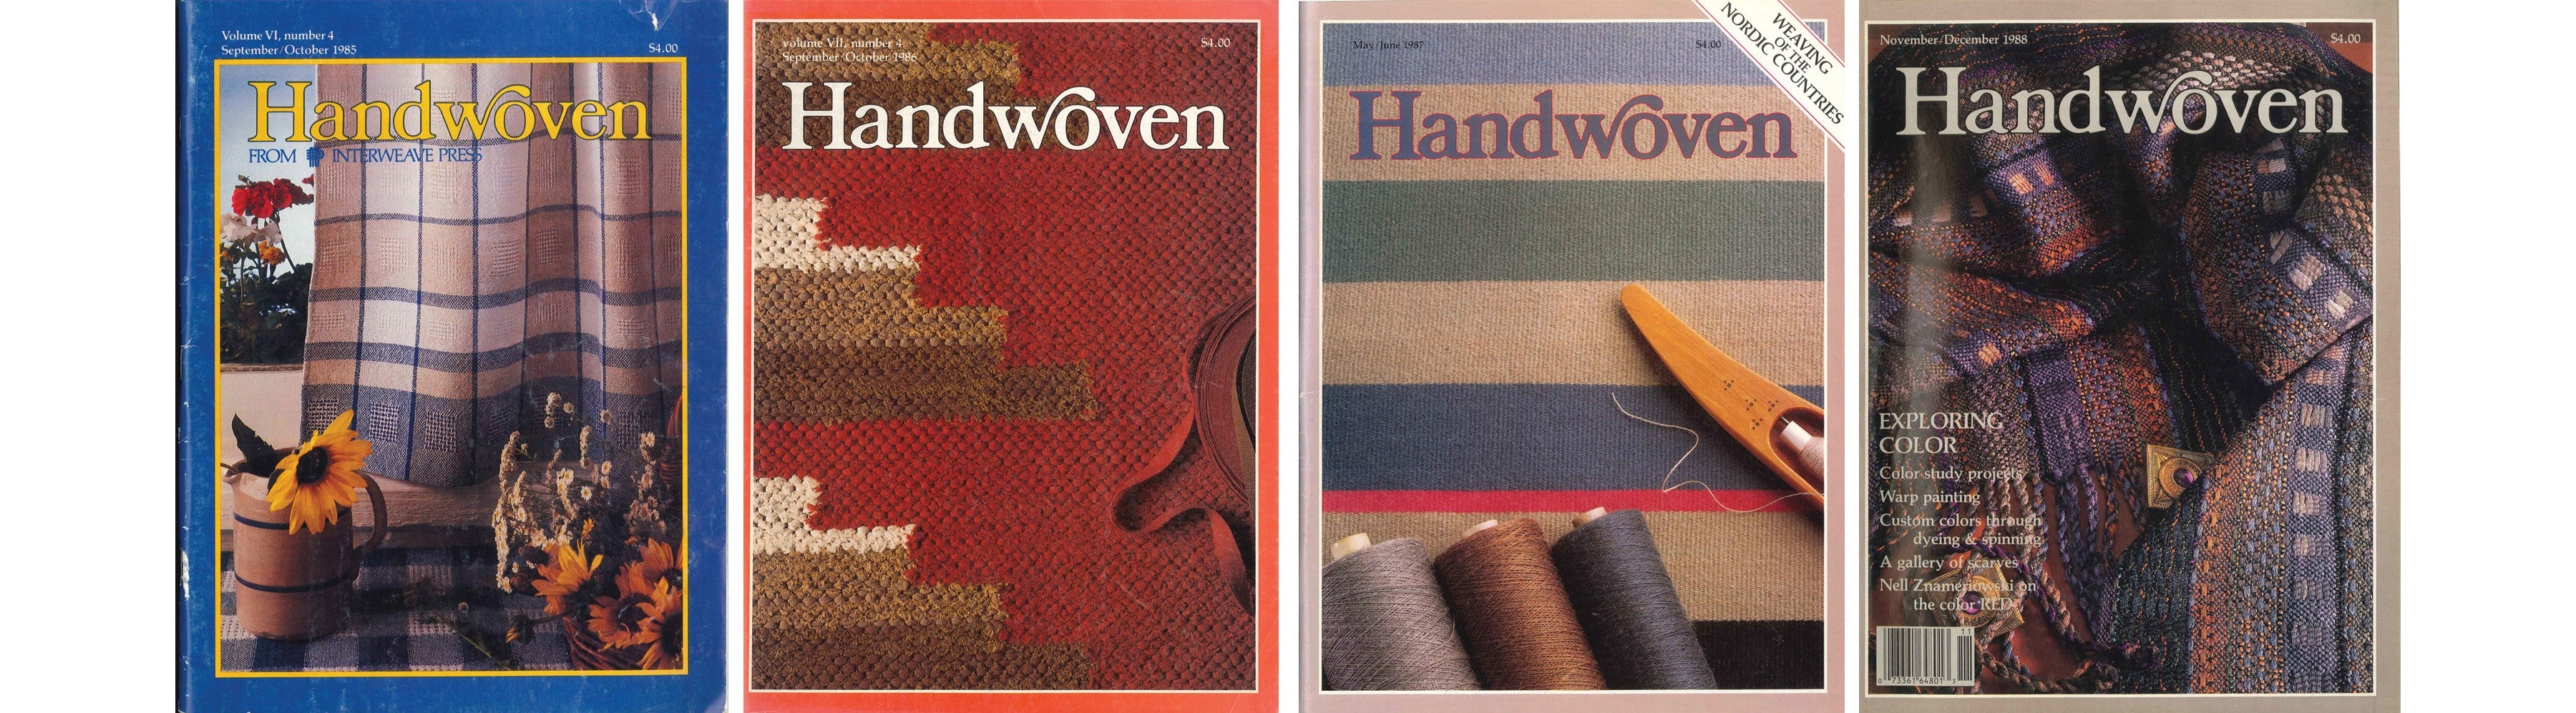 40 Years of Handwoven: Musings from a Former Editor